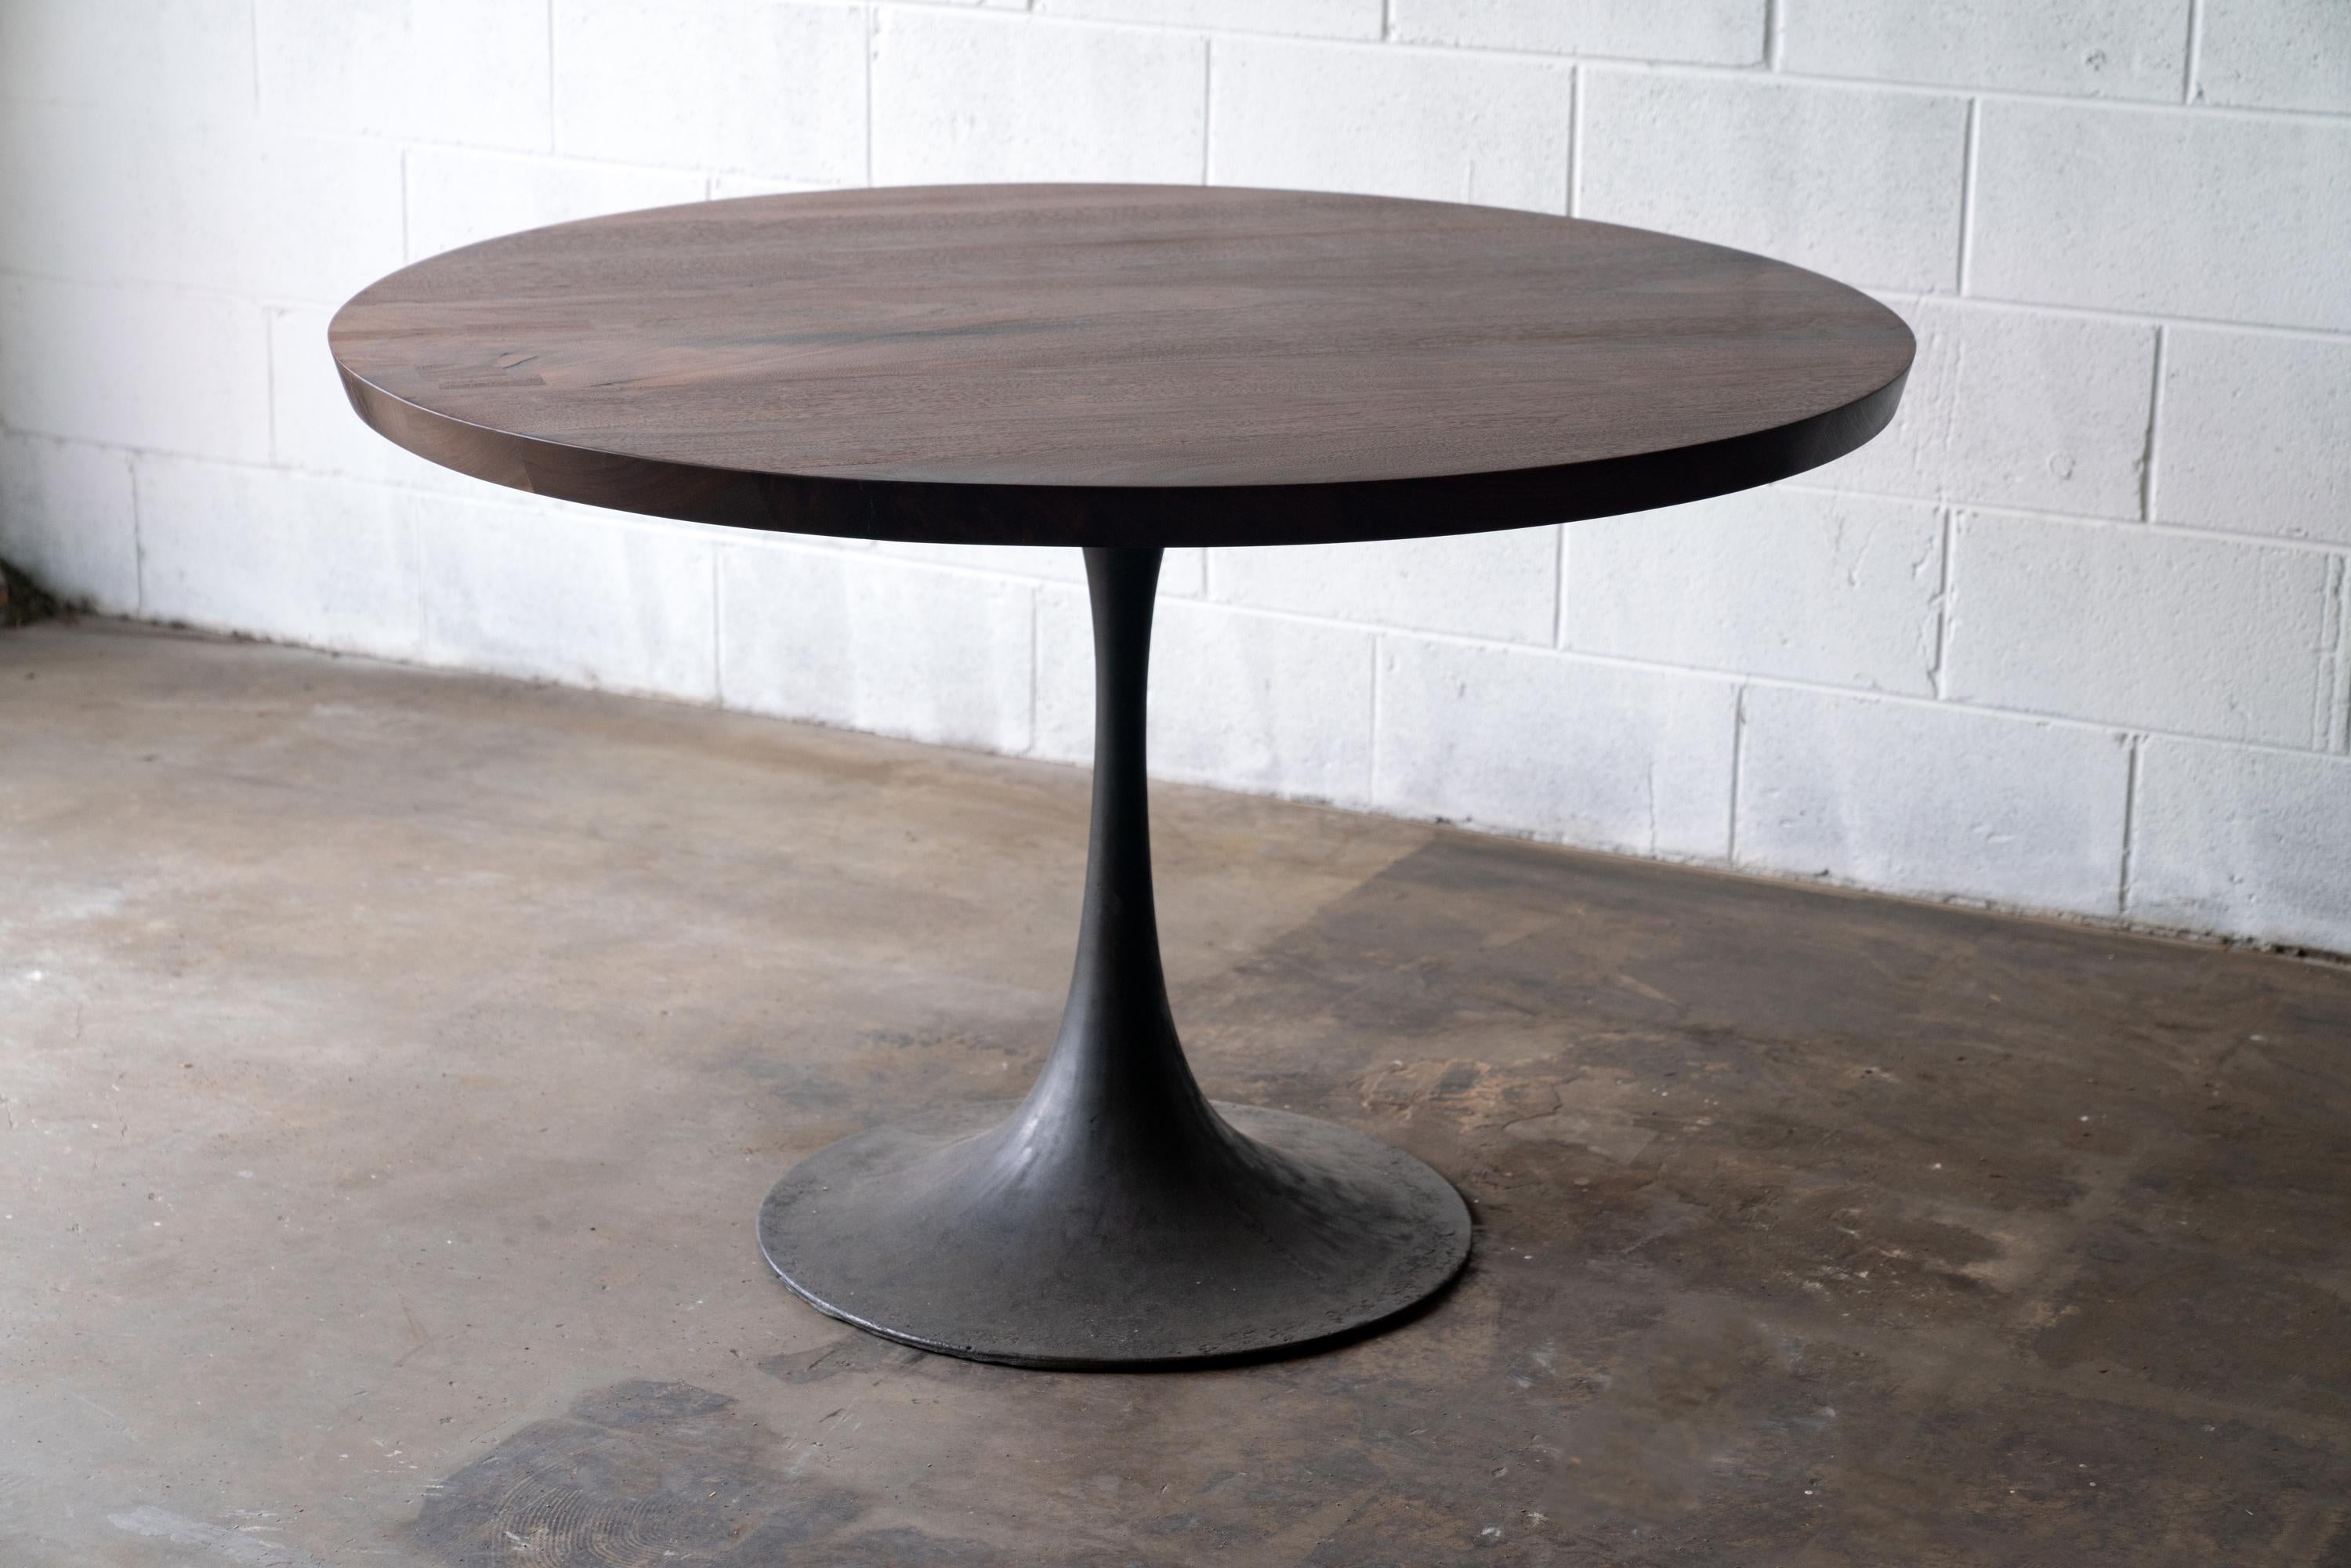 American Round Pedestal Base Dining Table Solid Walnut Wood Cast Iron Amicalola Base For Sale